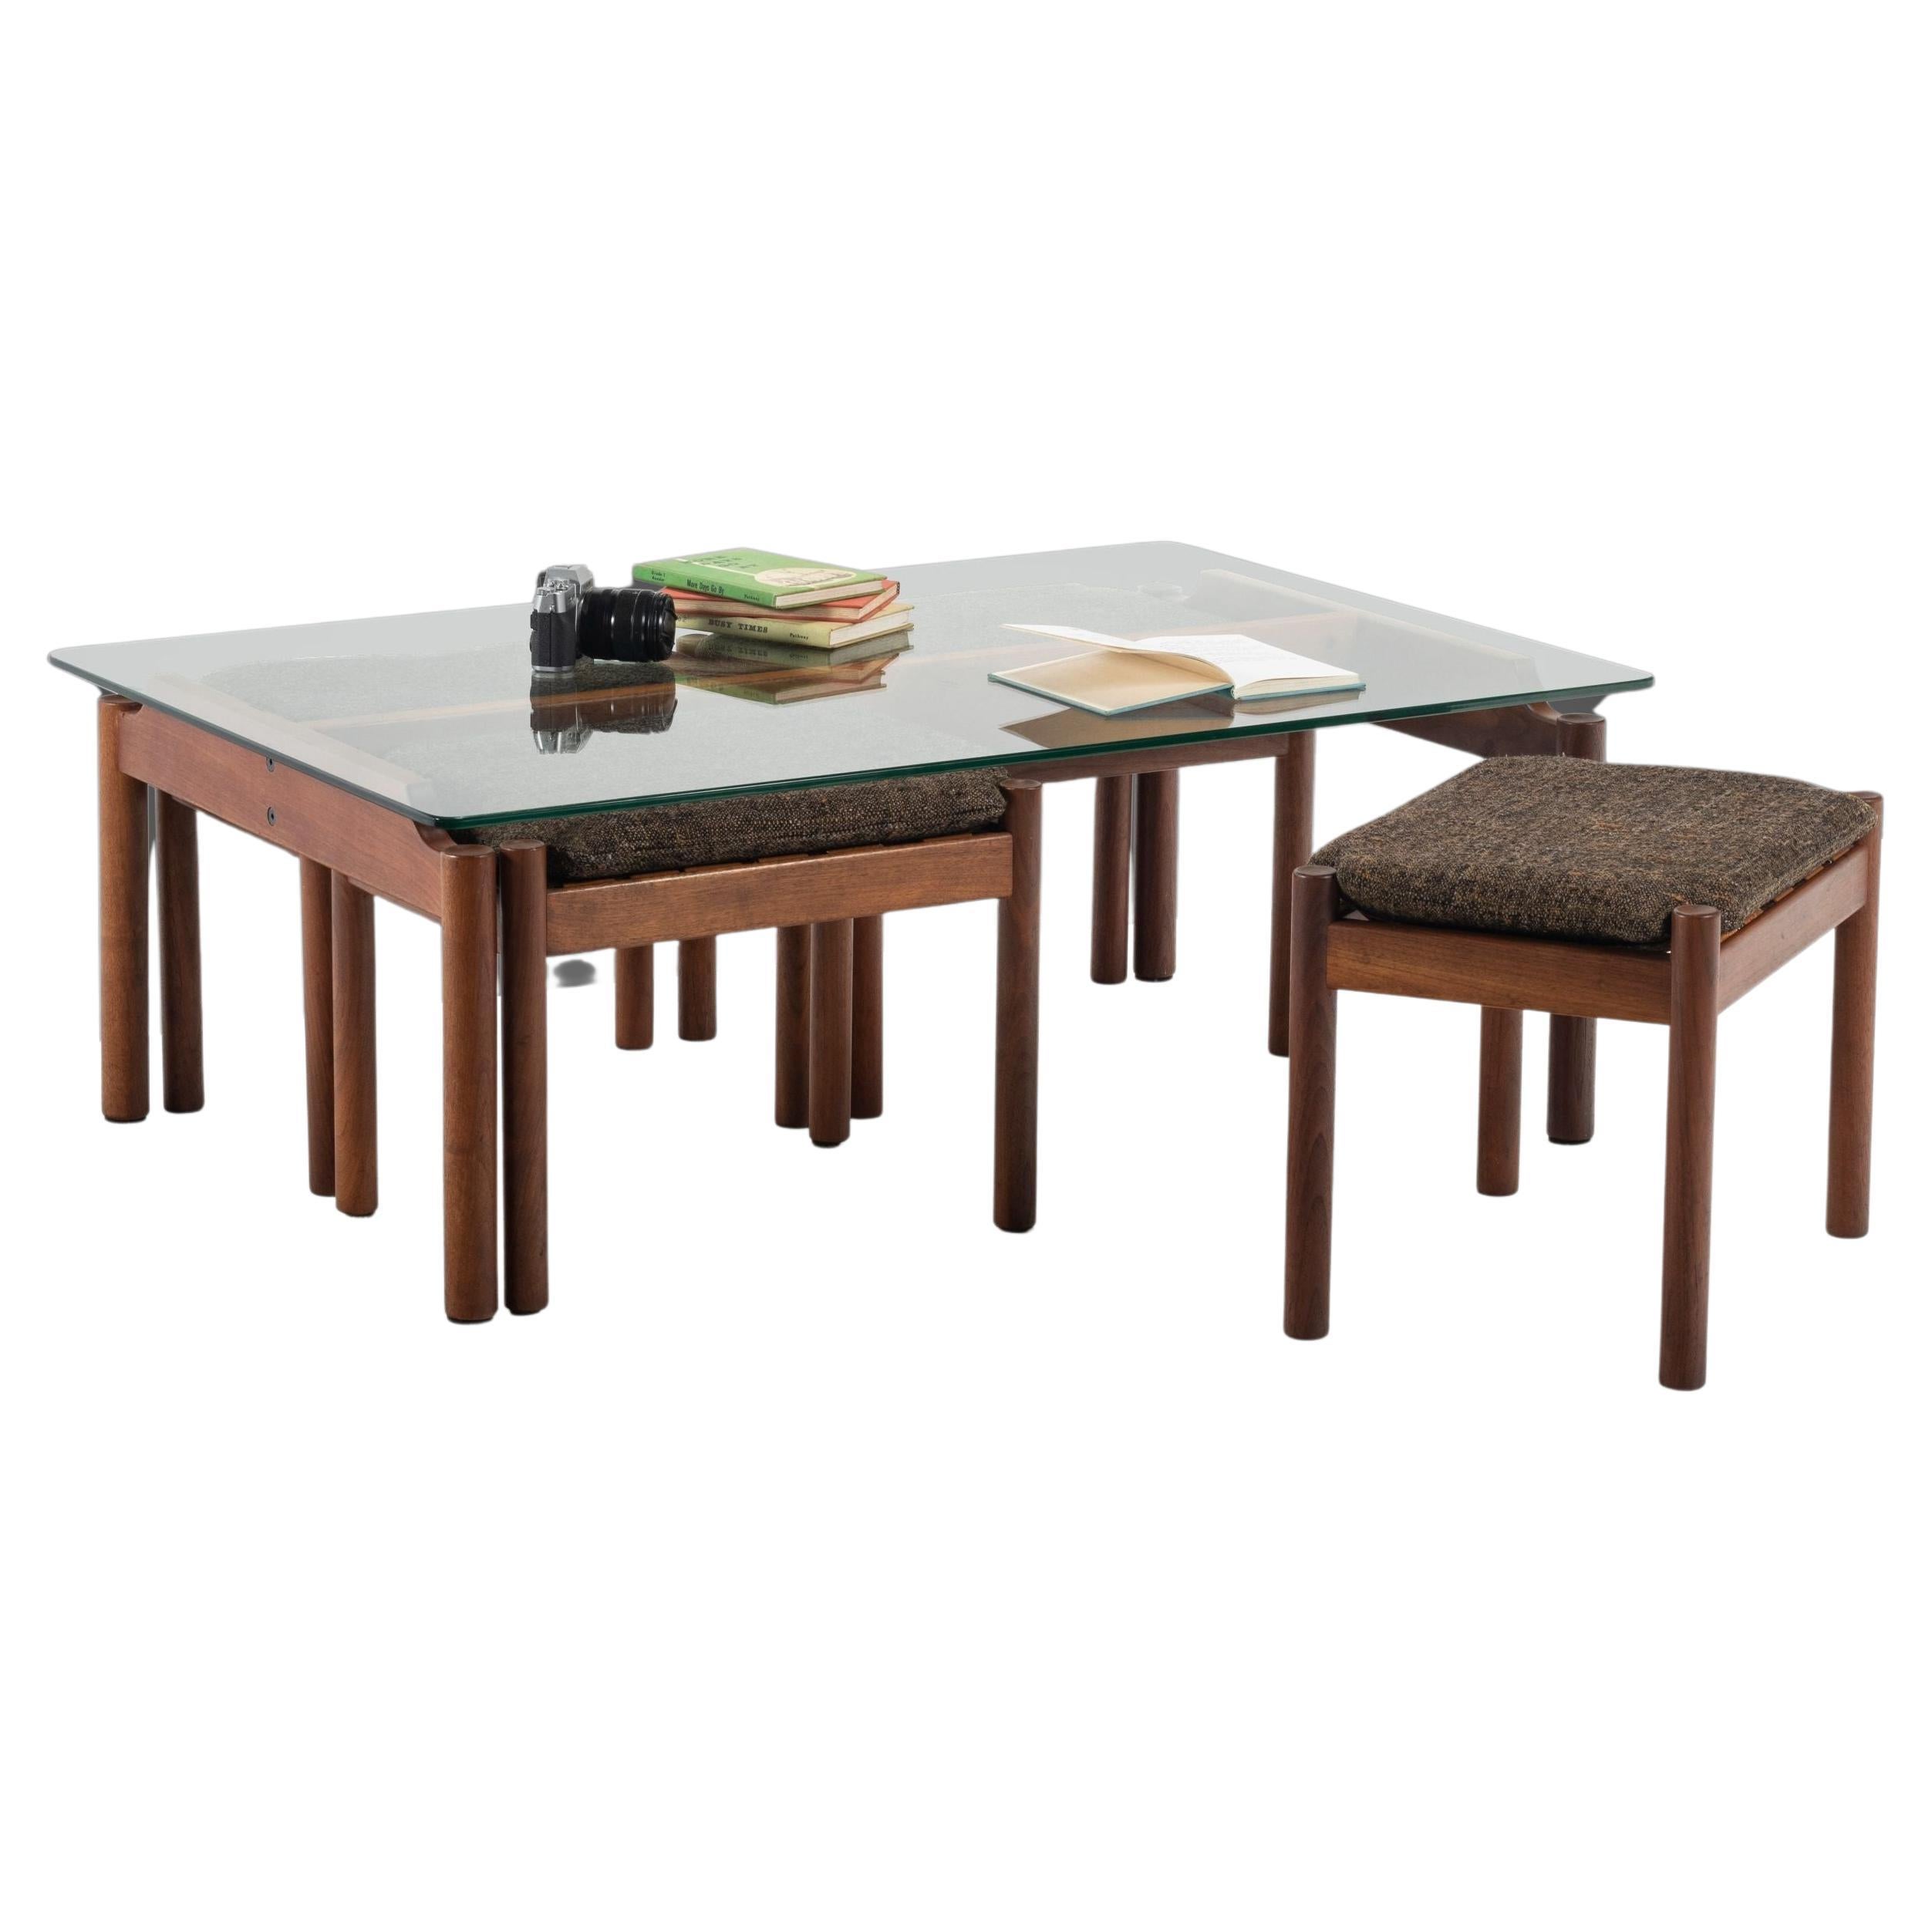 As functional as it is aesthetically pleasing this coffee table with matching nesting stools is perfect for collectors and designers looking to get the most out of a small-sized piece. Constructed of solid teak, a large thick-cut glass top and